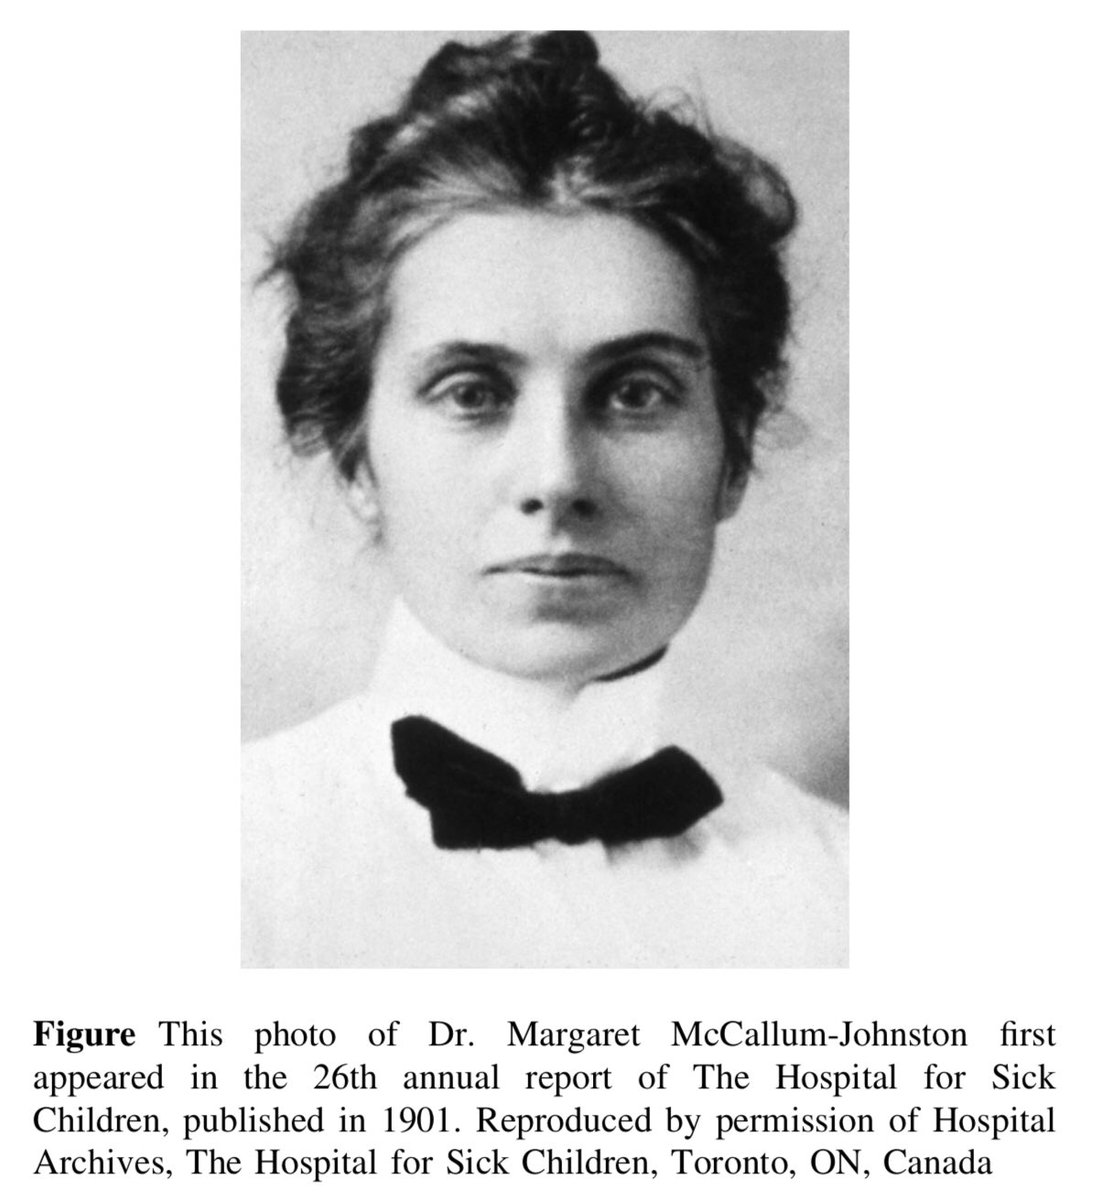 Dr. Margaret McCallum-Johnston (1875-1947), a graduate of the Ontario Medical College for Women, was a pioneer in the practice of #anesthesia in Canada and helped pave the way for many female physicians to follow #WomenInAnesthesia rdcu.be/PcYv